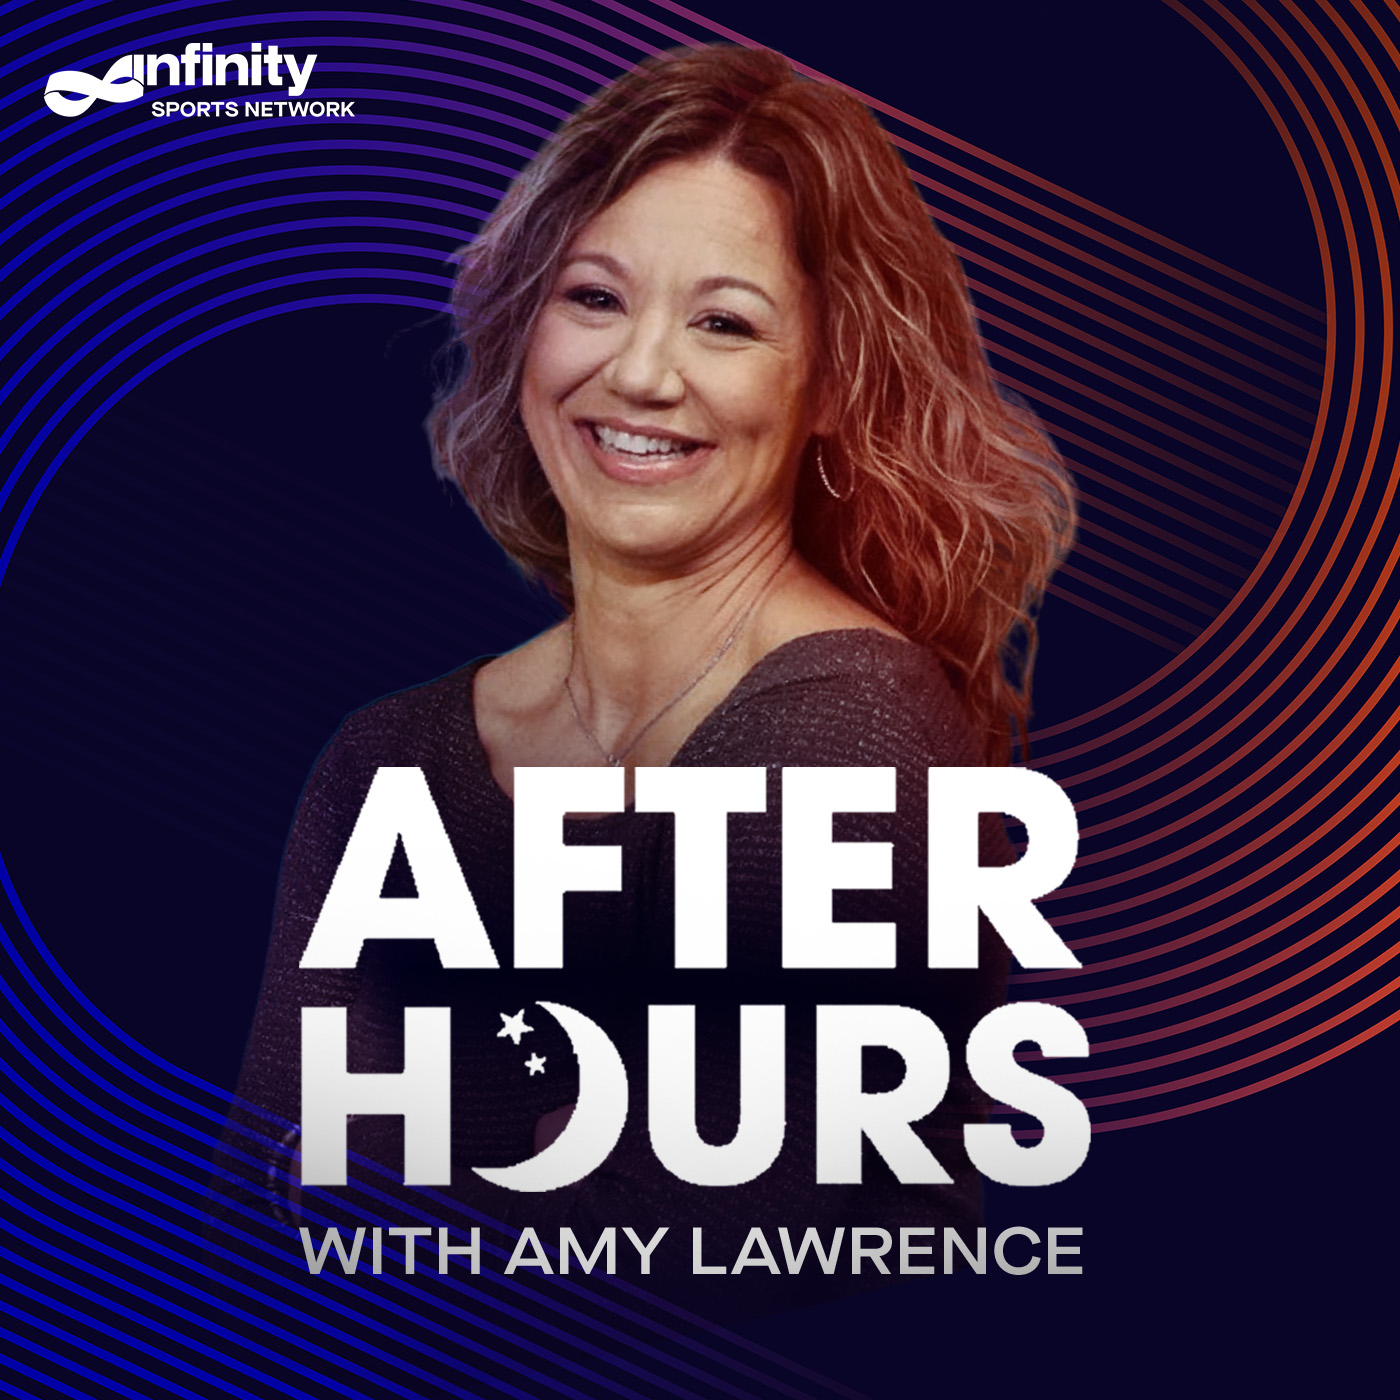 5/25/21 After Hours with Amy Lawrence PODCAST: Hour 1